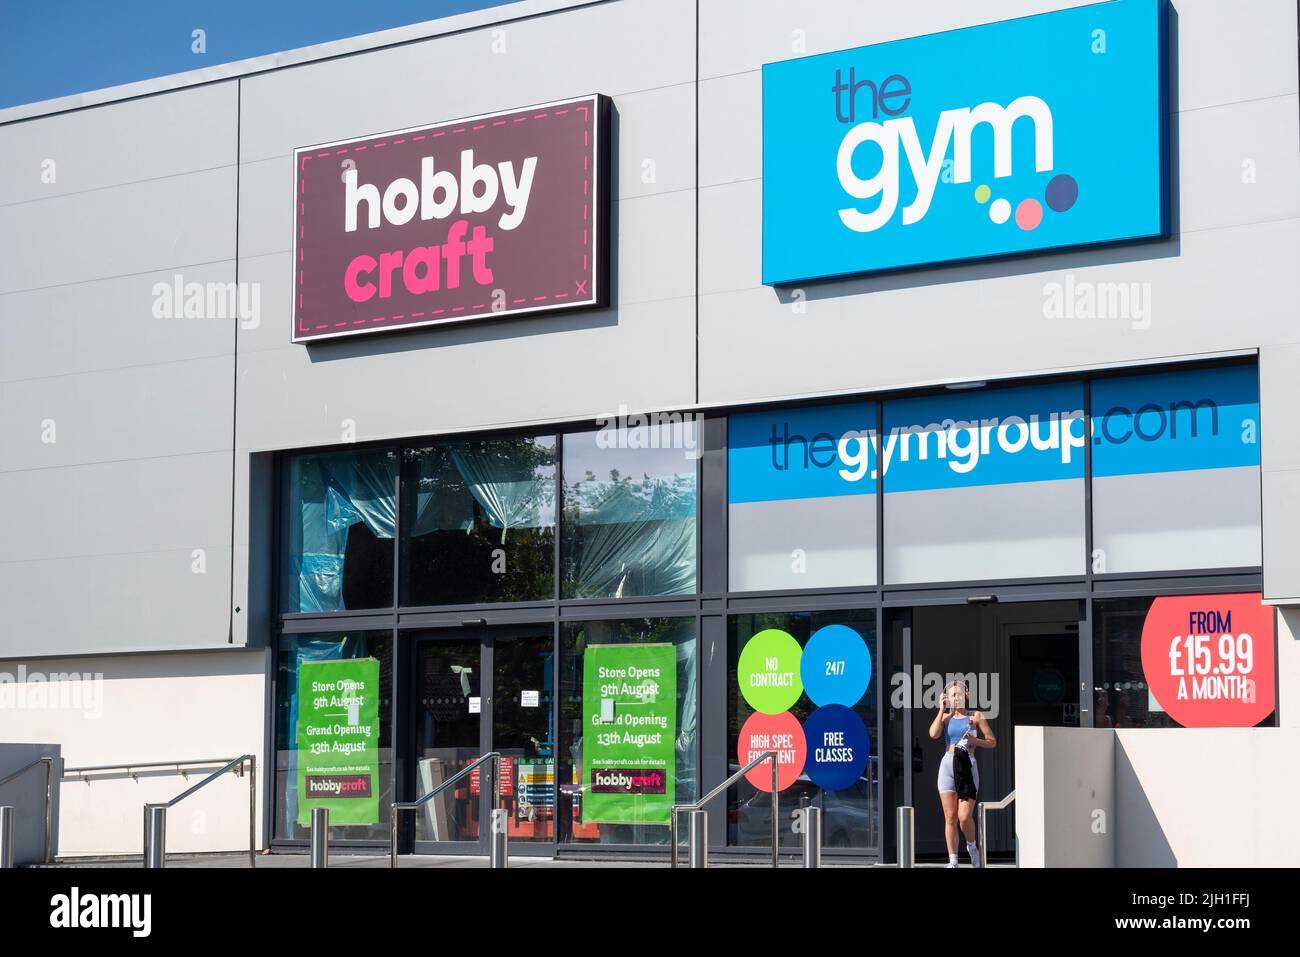 New Hobbycraft store due to open in August 2022 in Southend on Sea, Essex, UK. Expanding British hoppy shop chain. Next to the Gym Group venue Stock Photo